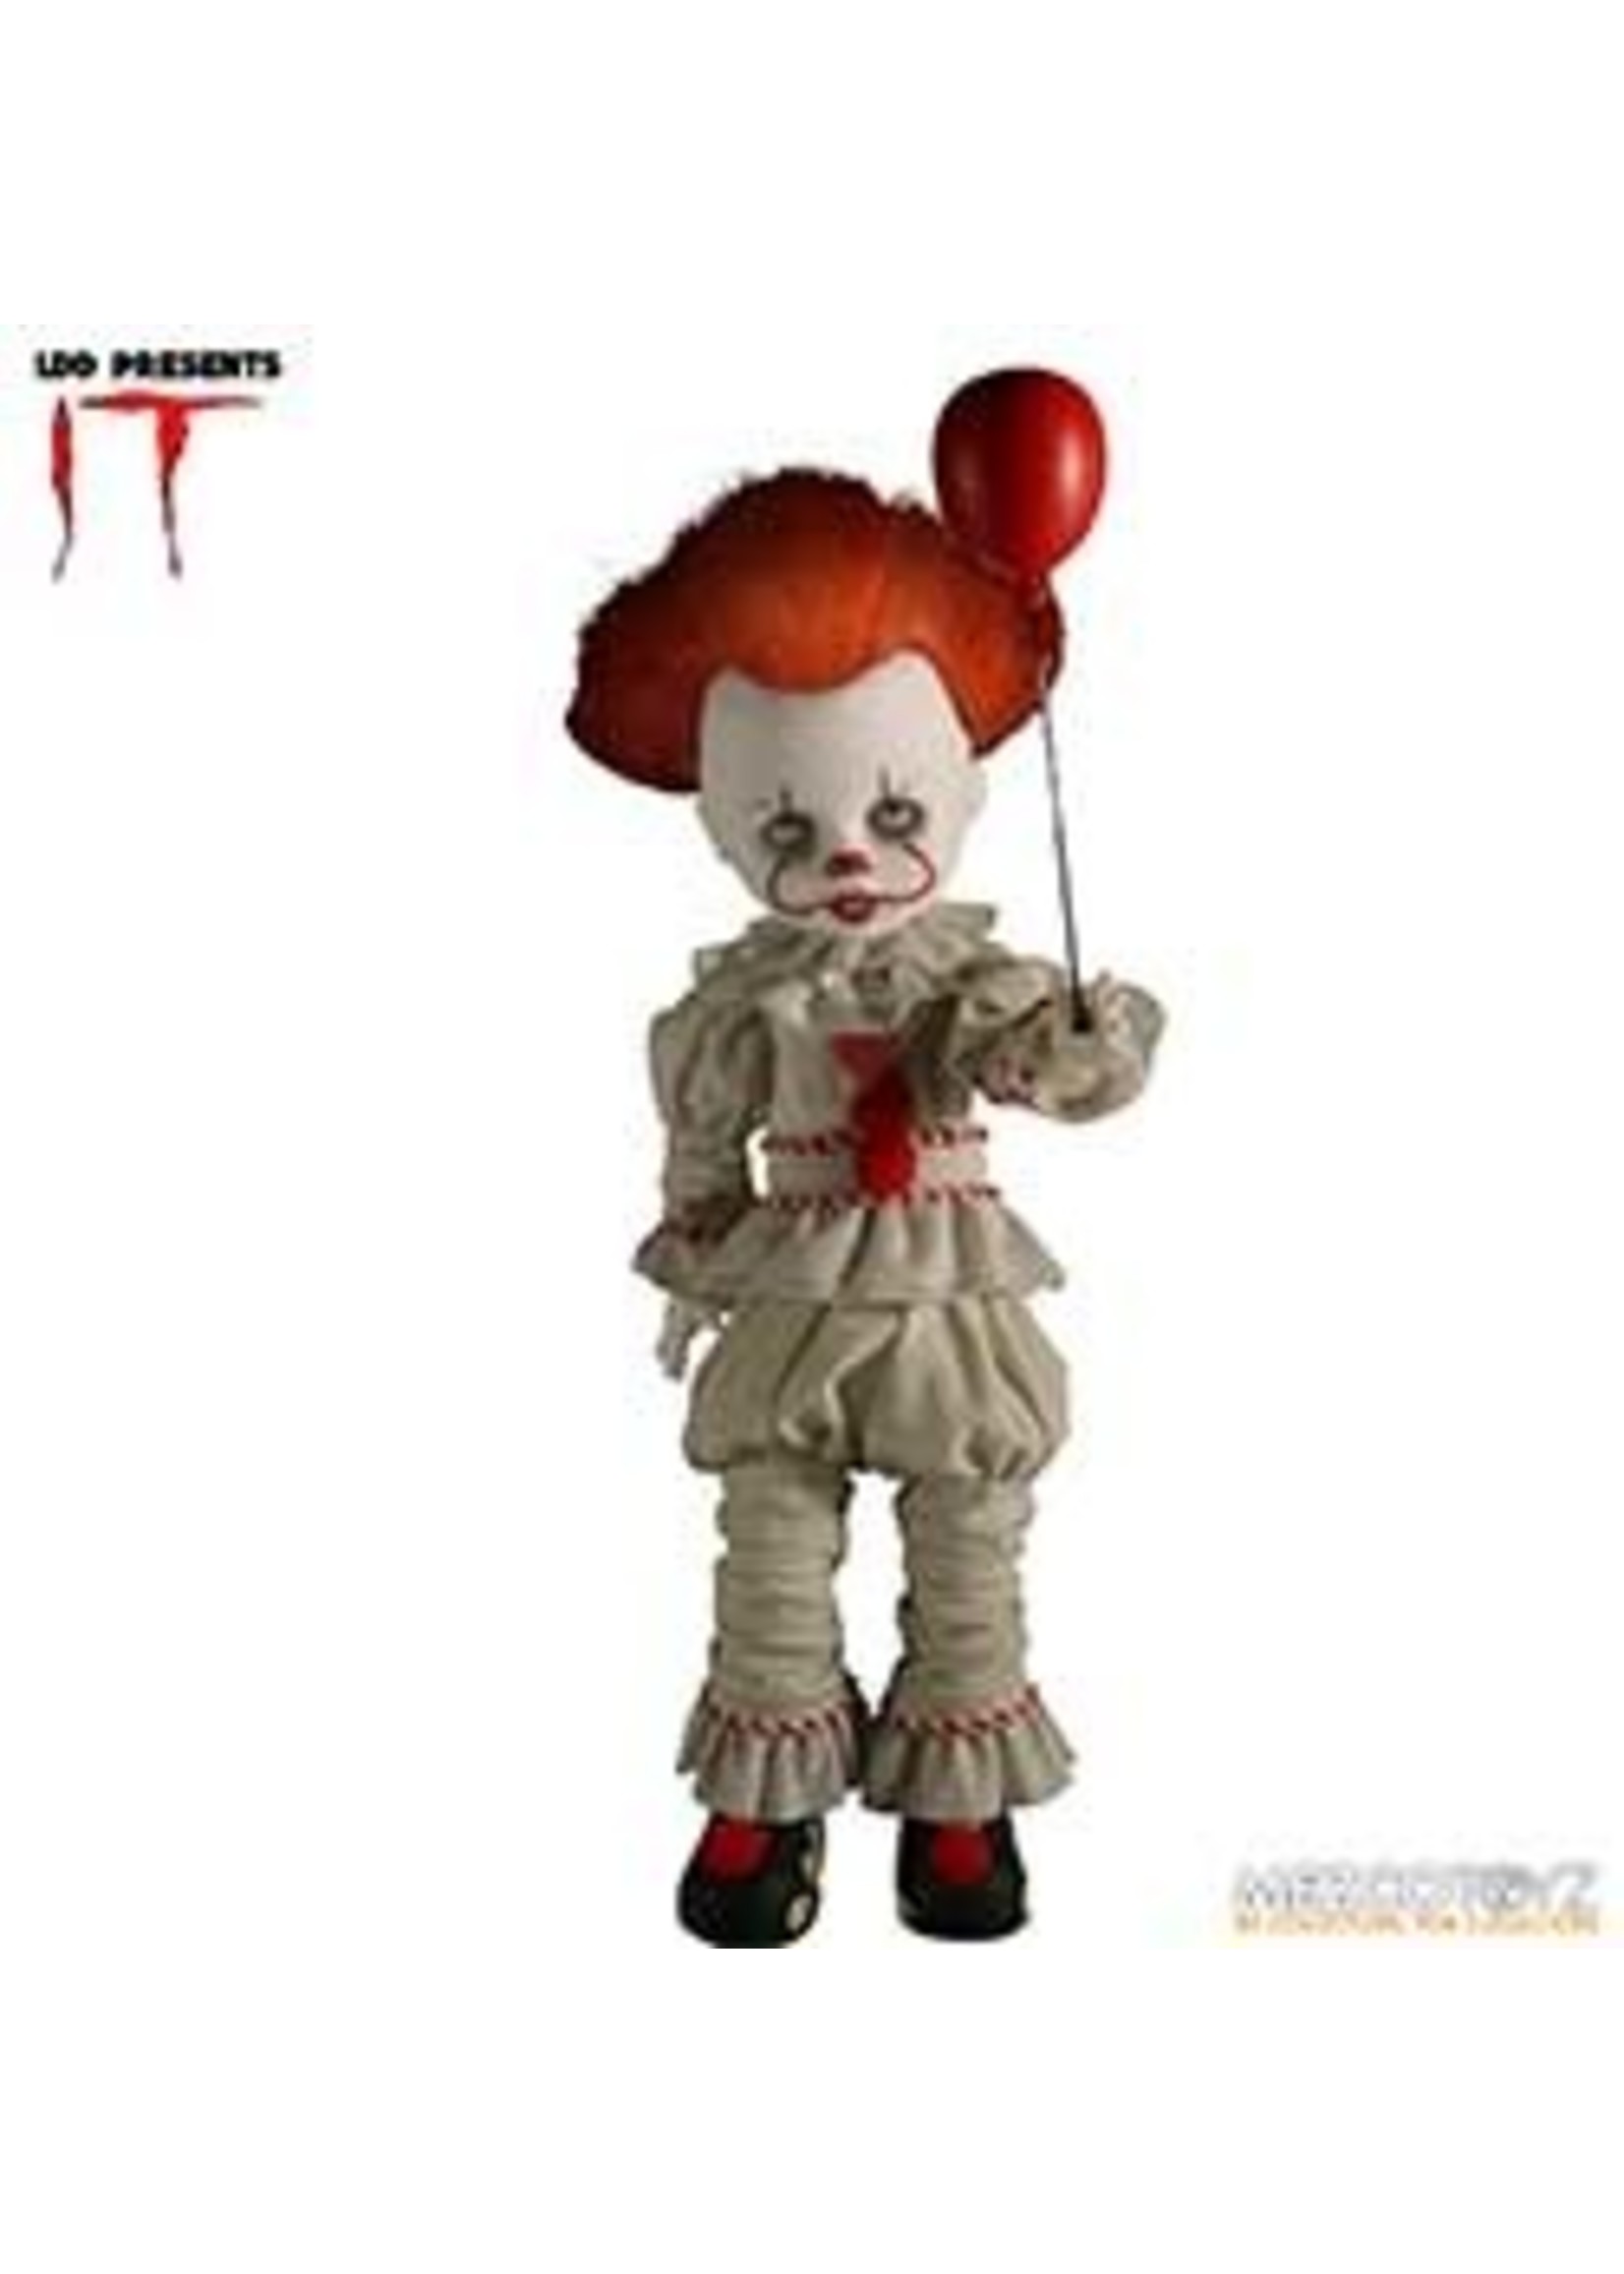 LDD PRESENTS IT PENNYWISE (2017)